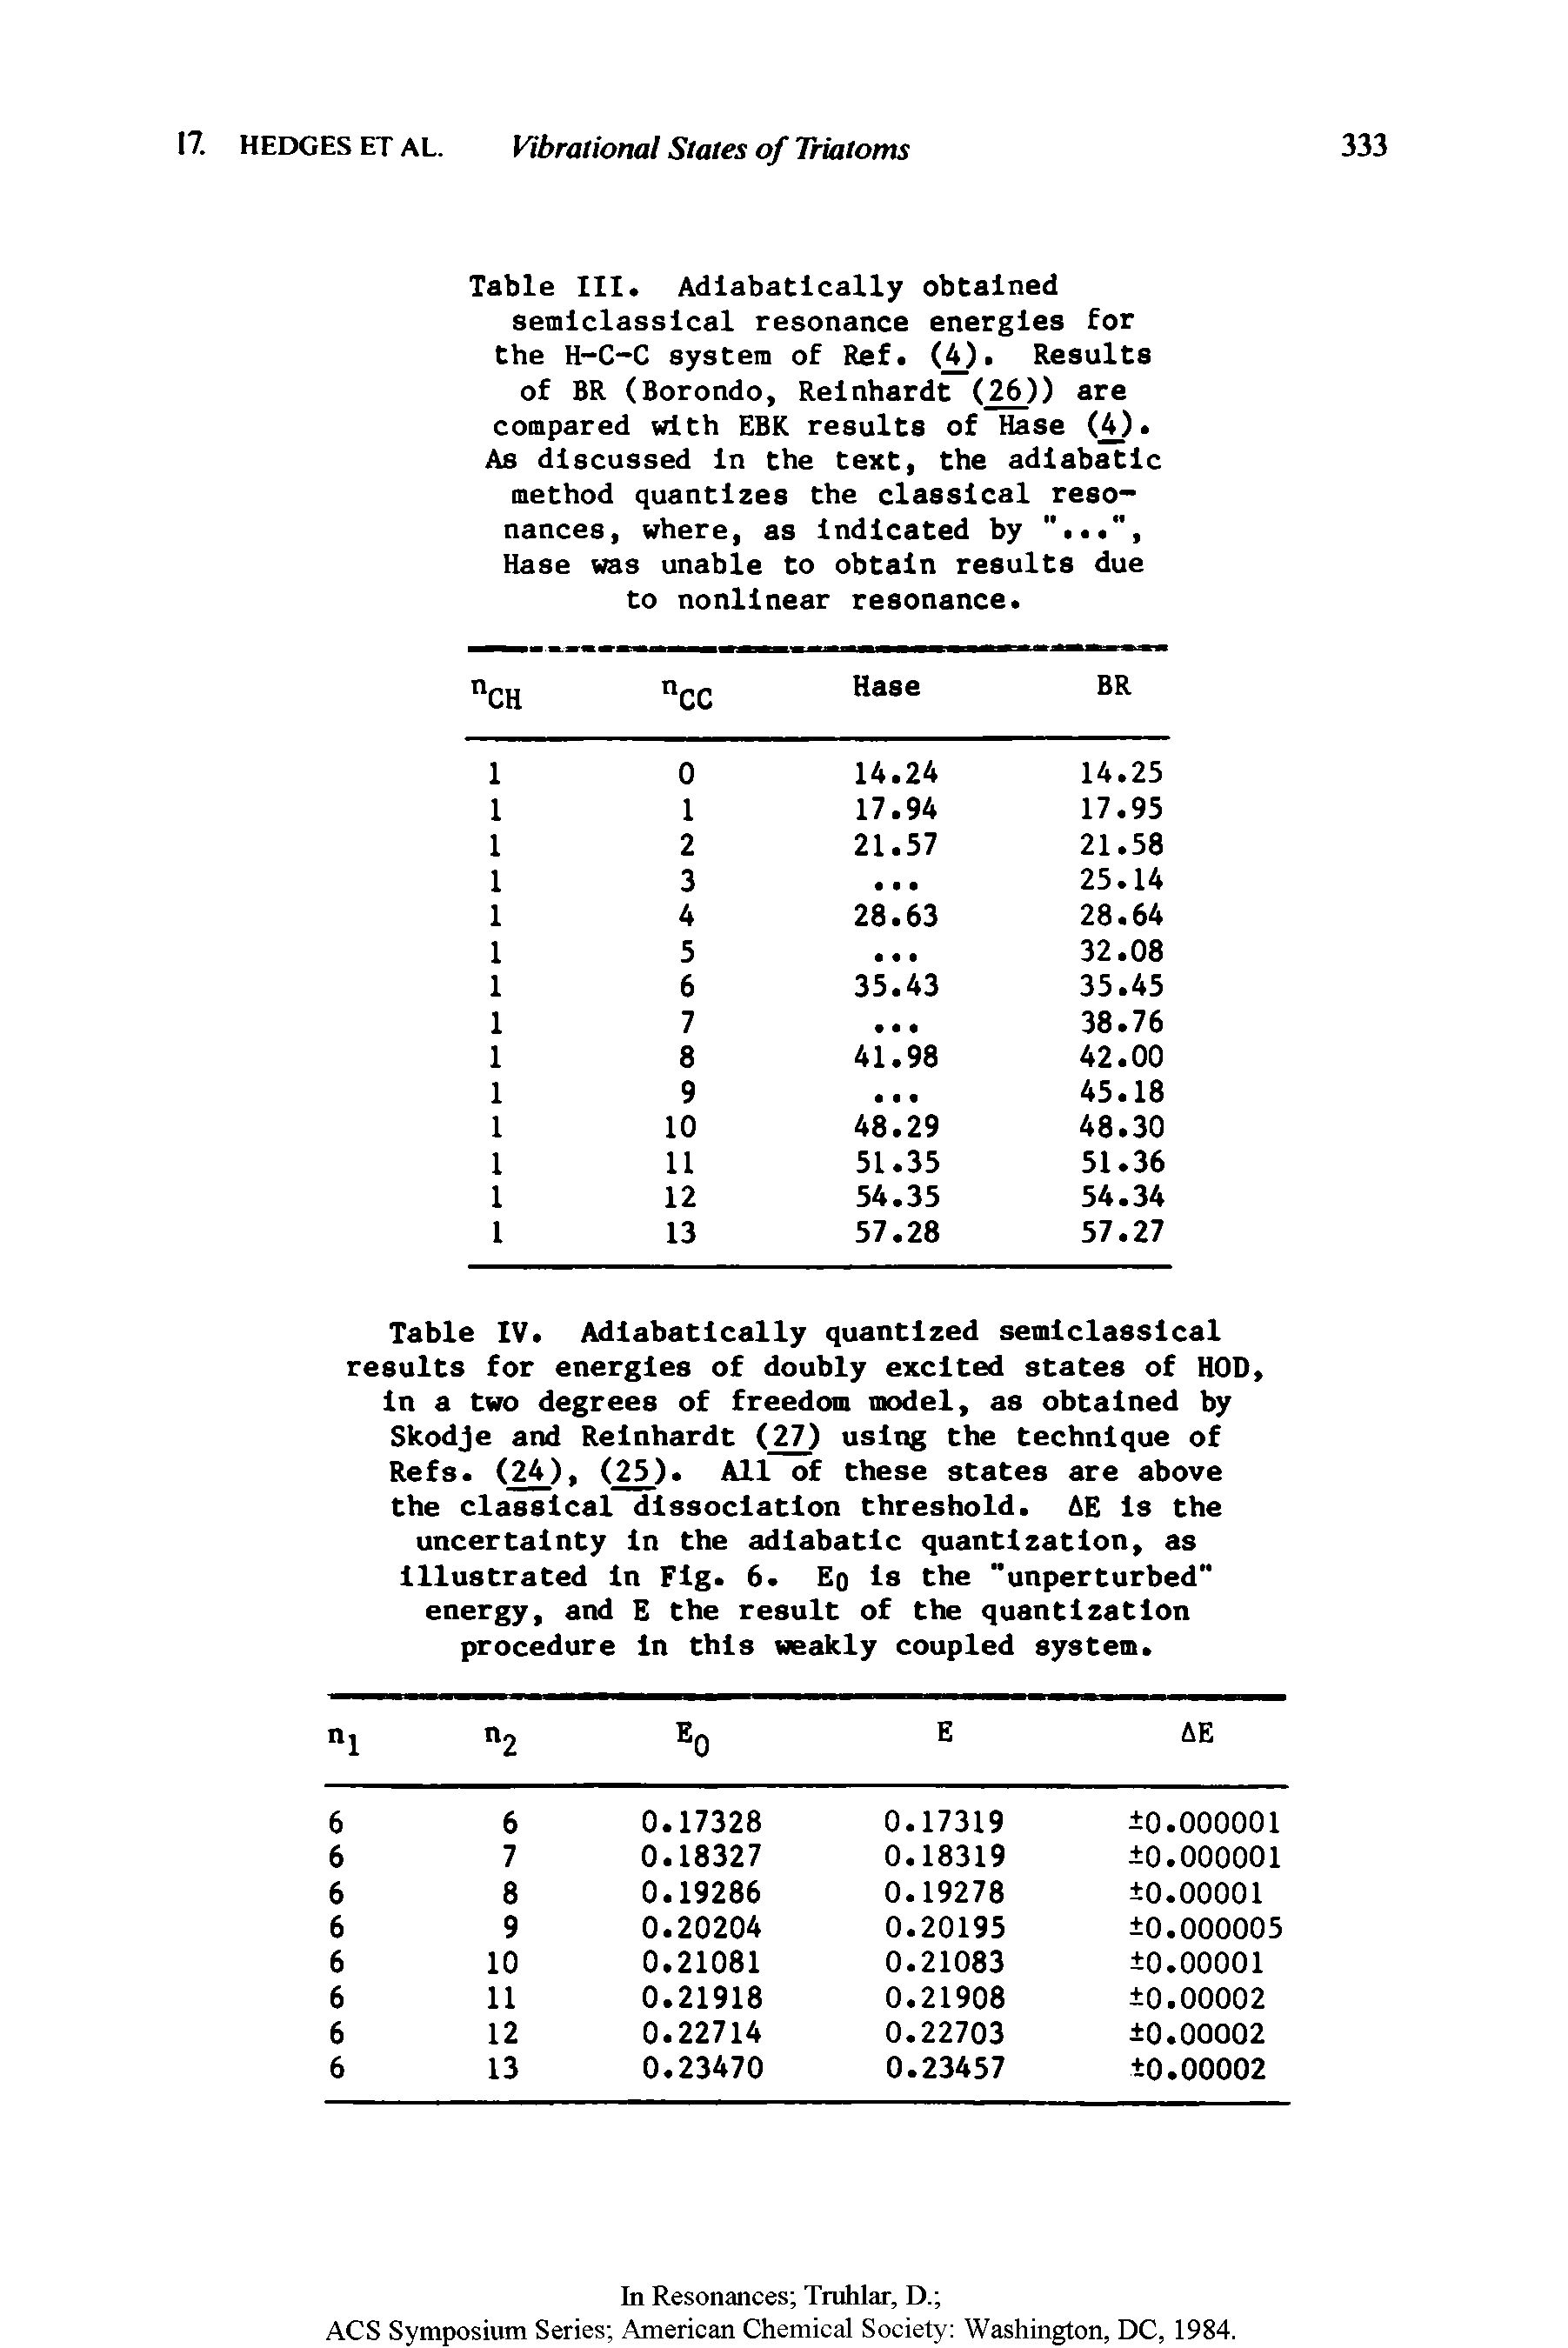 Table IV. Adlabatlcally quantized semlclasslcal results for energies of doubly excited states of HOD, In a two degrees of freedom model, as obtained by Skodje and Reinhardt (27) using the technique of Refs. (24), (25). All of these states are above the classical dissociation threshold. AE Is the uncertainty In the adiabatic quantization, as Illustrated In Fig. 6. Eo Is the "unperturbed energy, and E the result of the quantization procedure In this weakly coupled system.